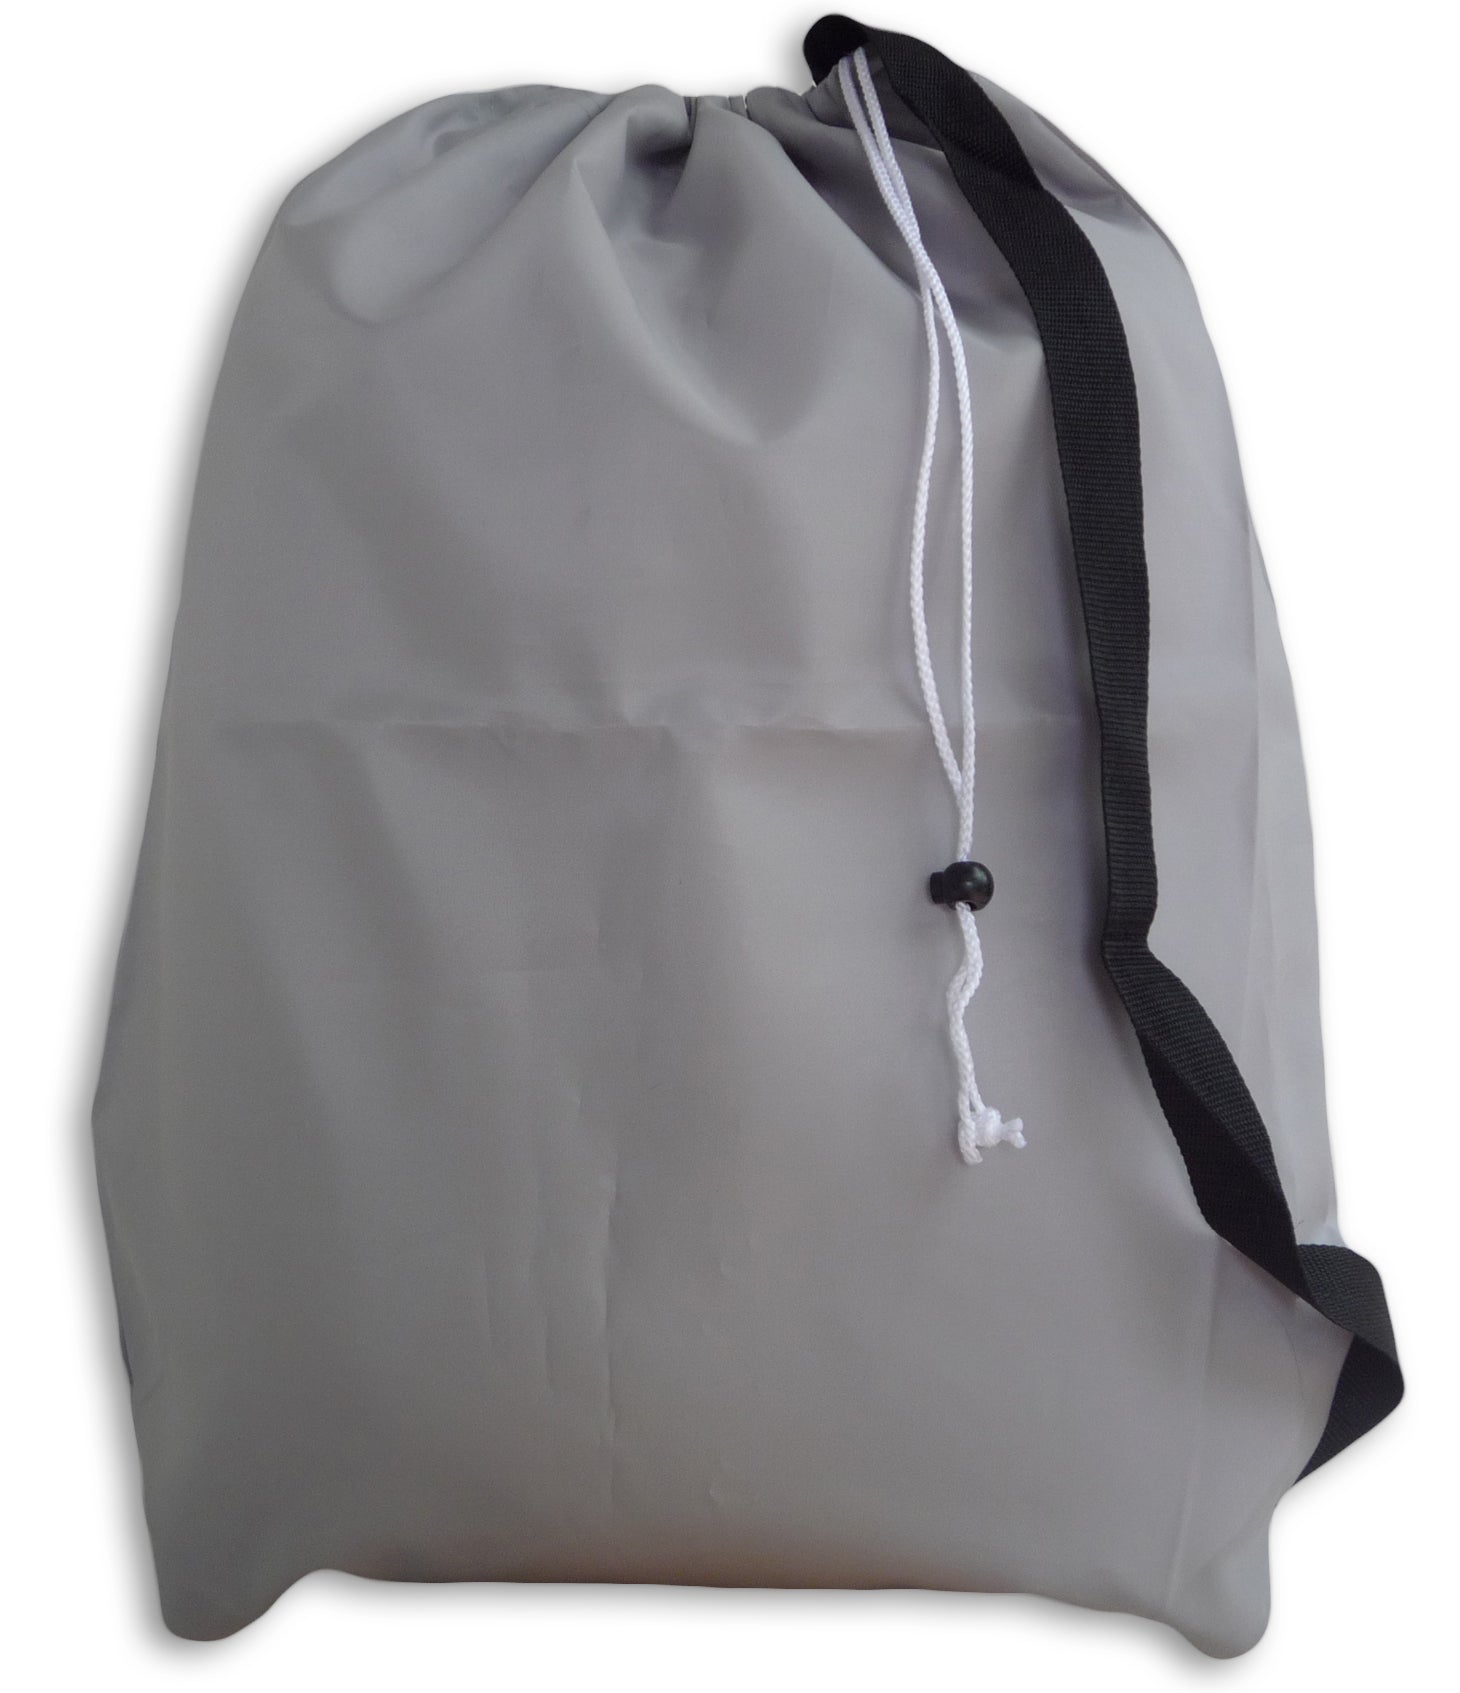 Homelux Large 30 x 40 inch Heavy Duty Nylon Laundry Bag with Drawstring Slip Lock Closure Assorted Colors and Designs